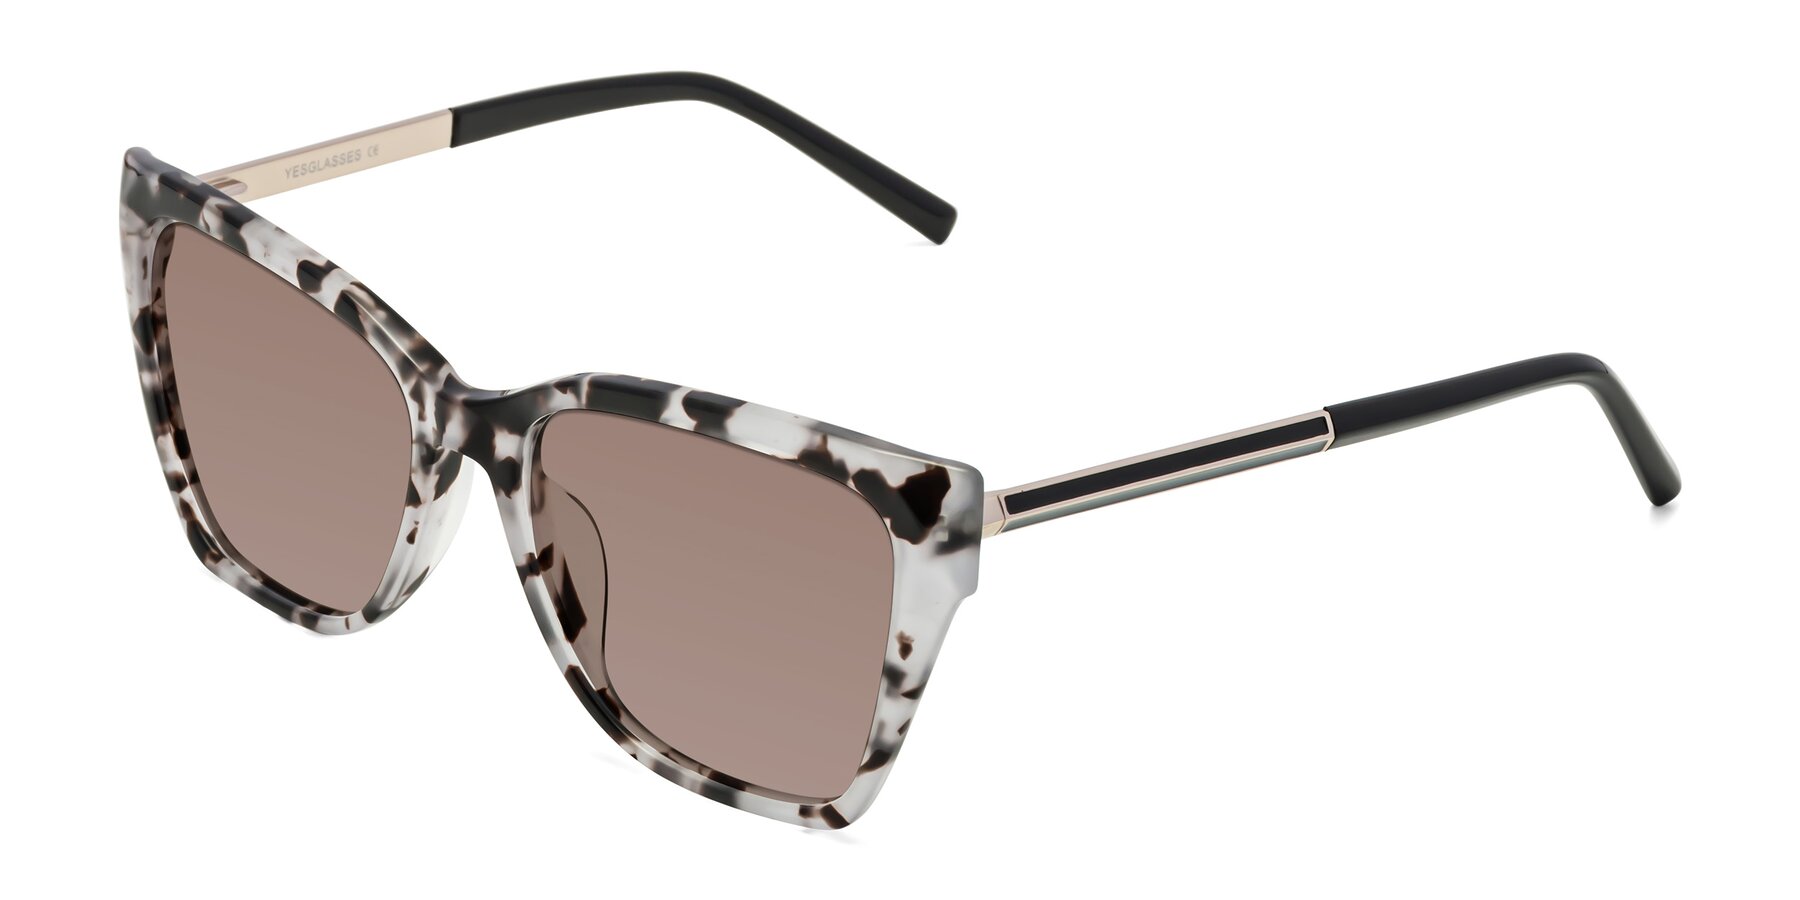 Angle of Swartz in White Tortoise with Medium Brown Tinted Lenses